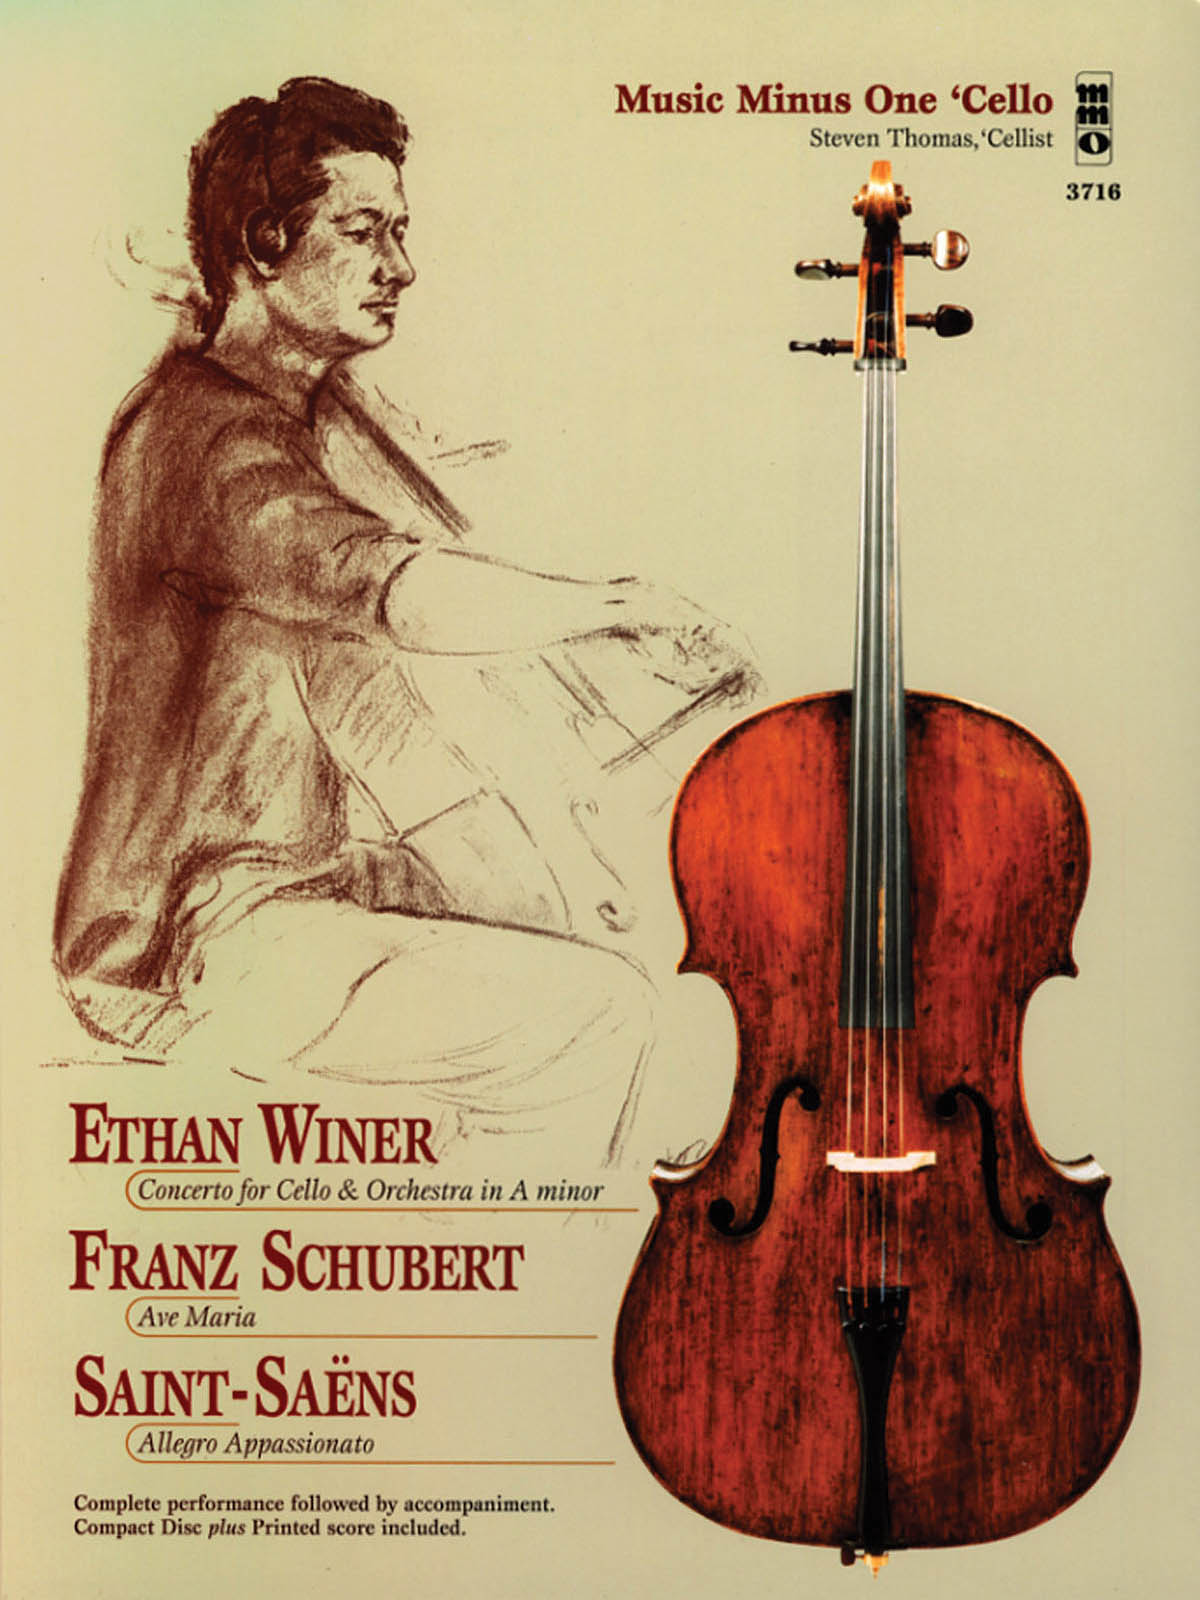 Ethan Winer, Franz Schubert, and Saint-Saëns - Music Minus One Cello - noty na violoncello